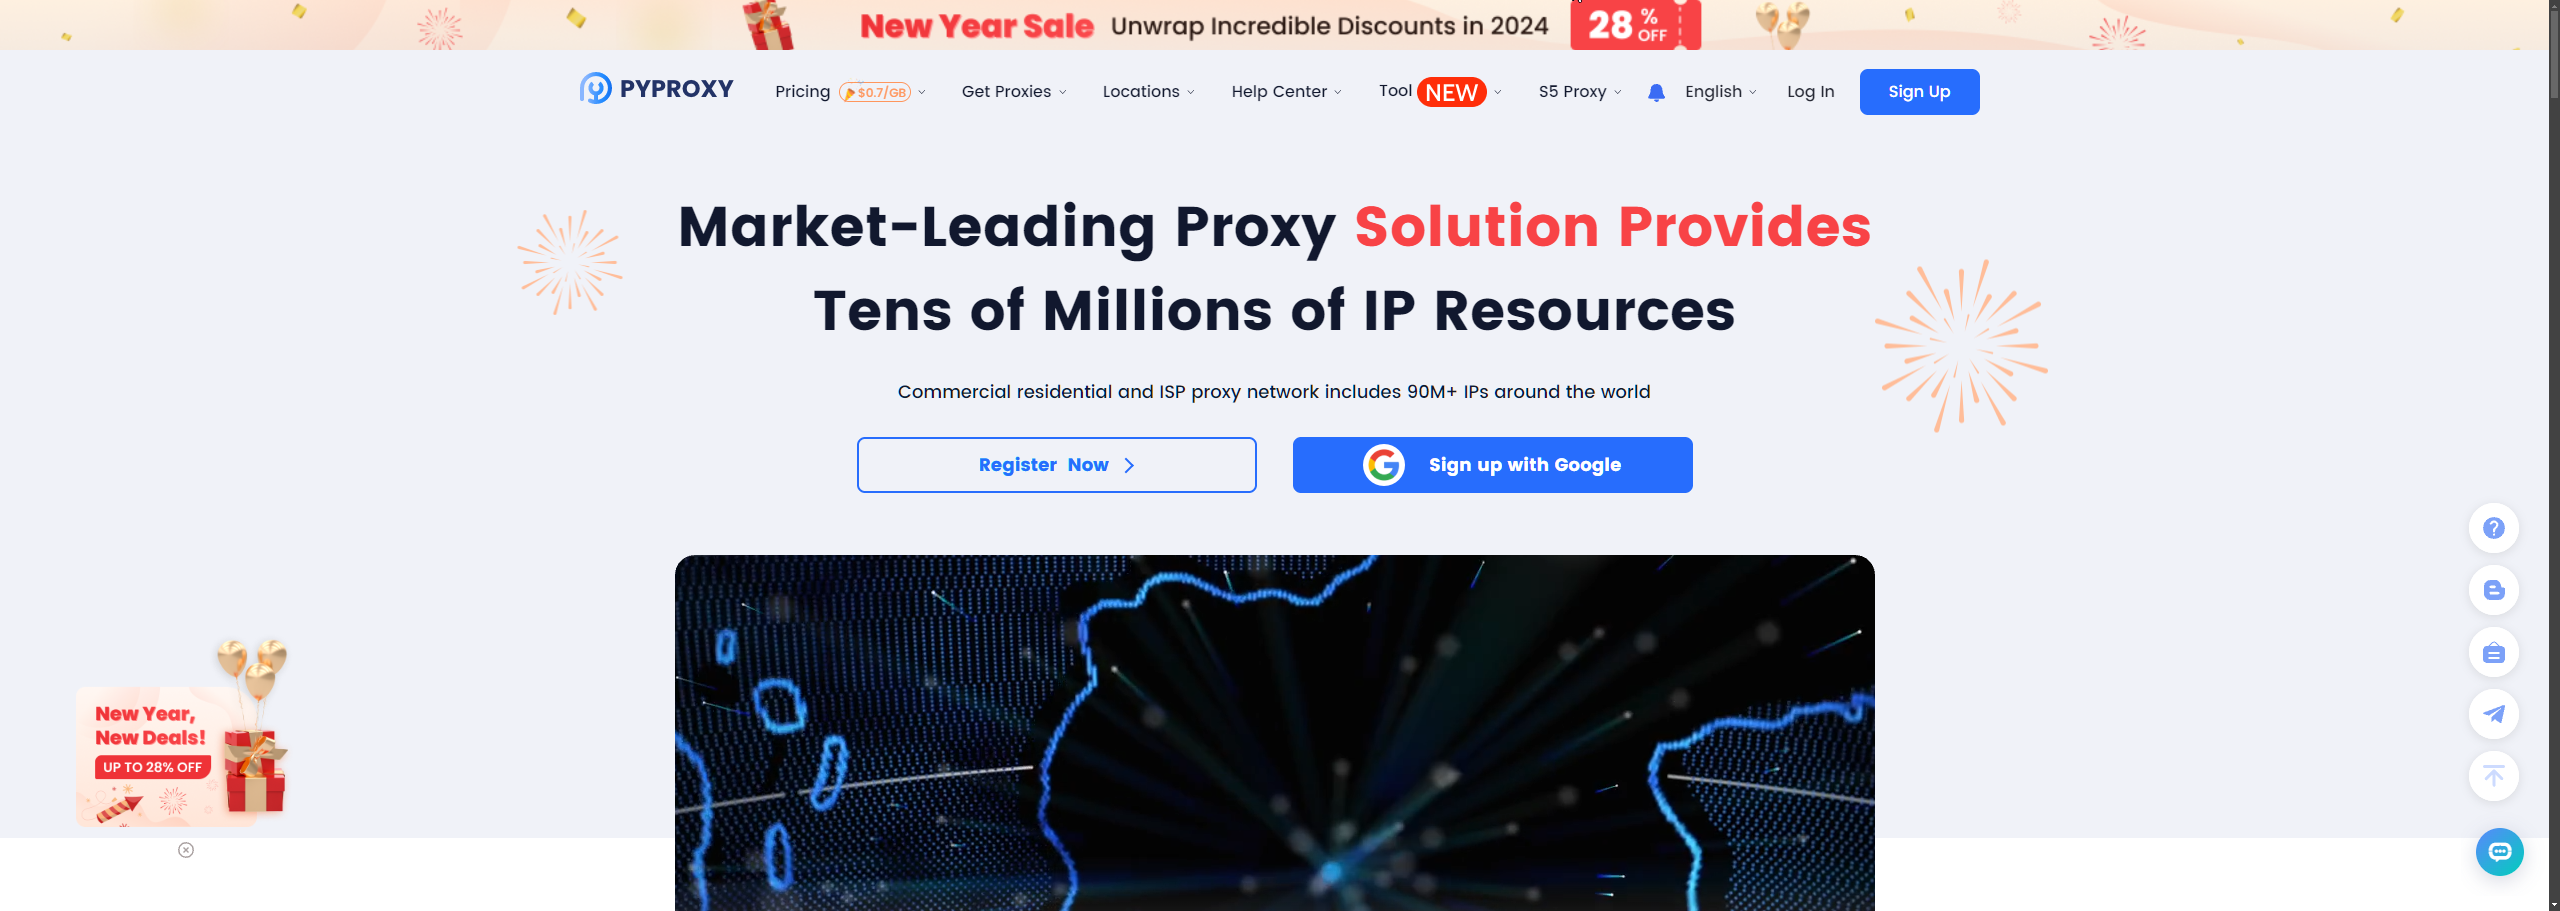 PYPROXY Review: The Best & Trusted Proxy Services Provider